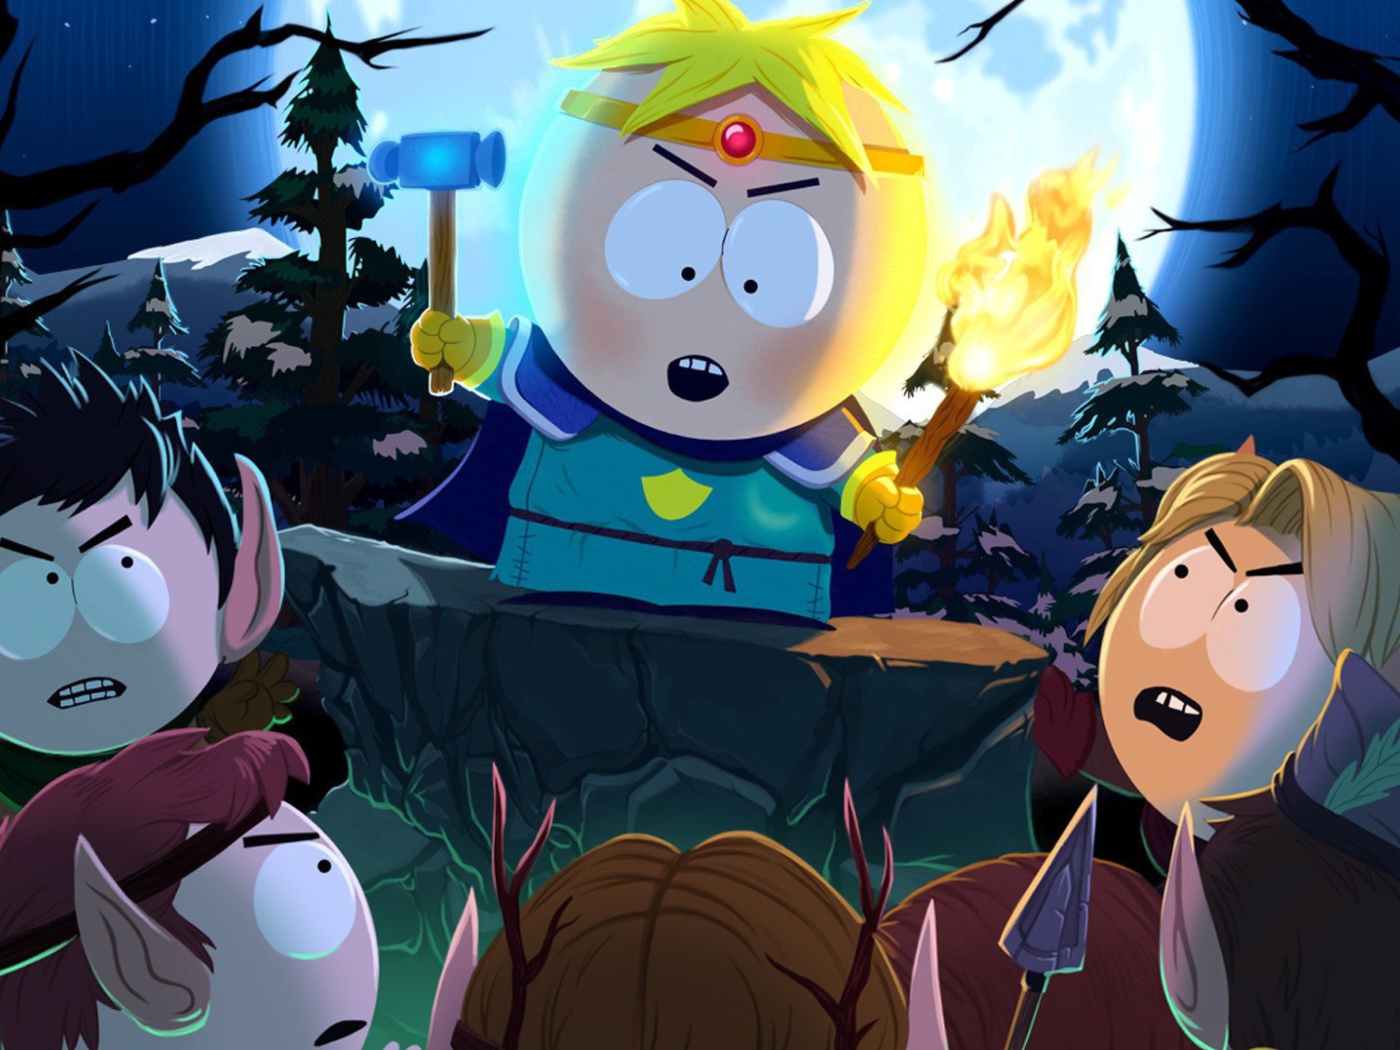 South Park The Stick Of Truth wallpaper 1400x1050